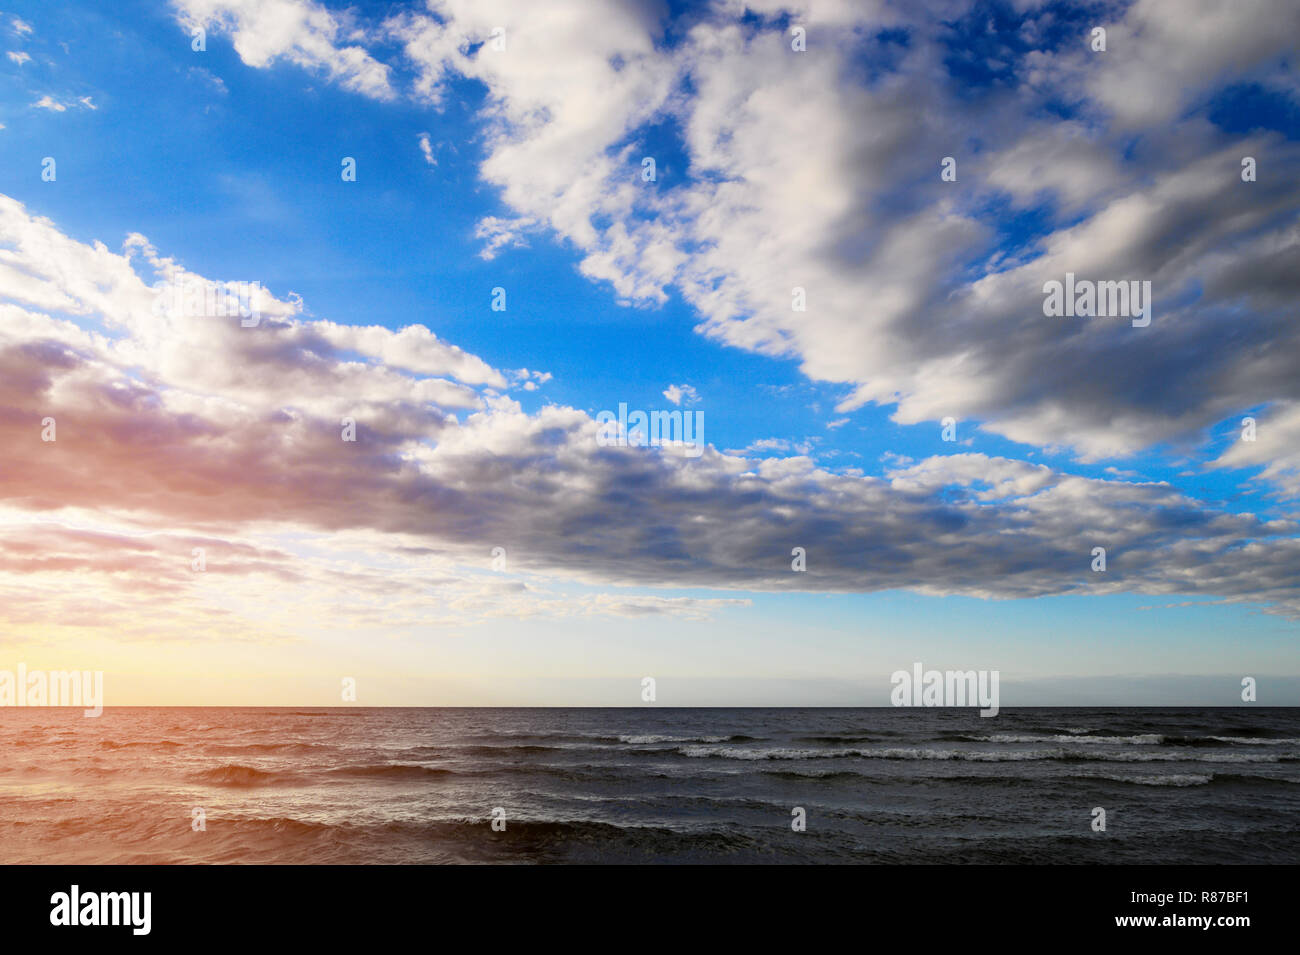 Baltic sea with scenic cumulus and stratocumulus clouds on the sky. Picturesque summer seascape. Pomerania, Gdansk bay, northern Poland. Stock Photo